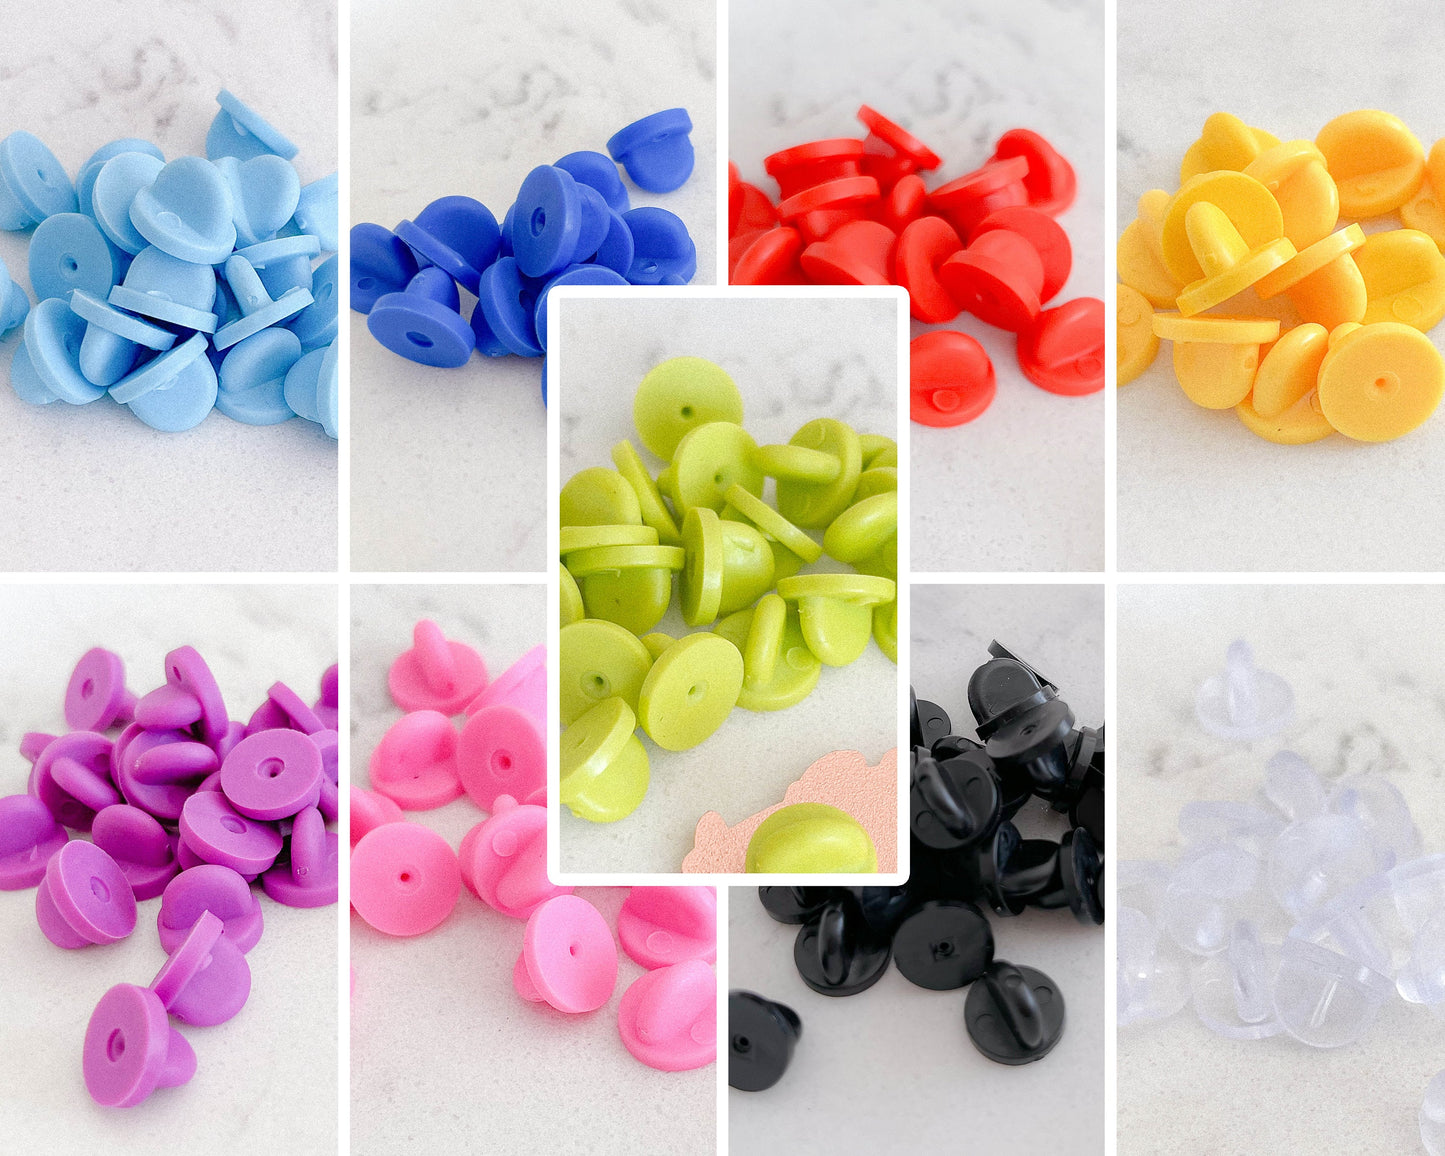 10 Rubber Pin Backs Clutches, Different Colors, Enamel Pin Lock